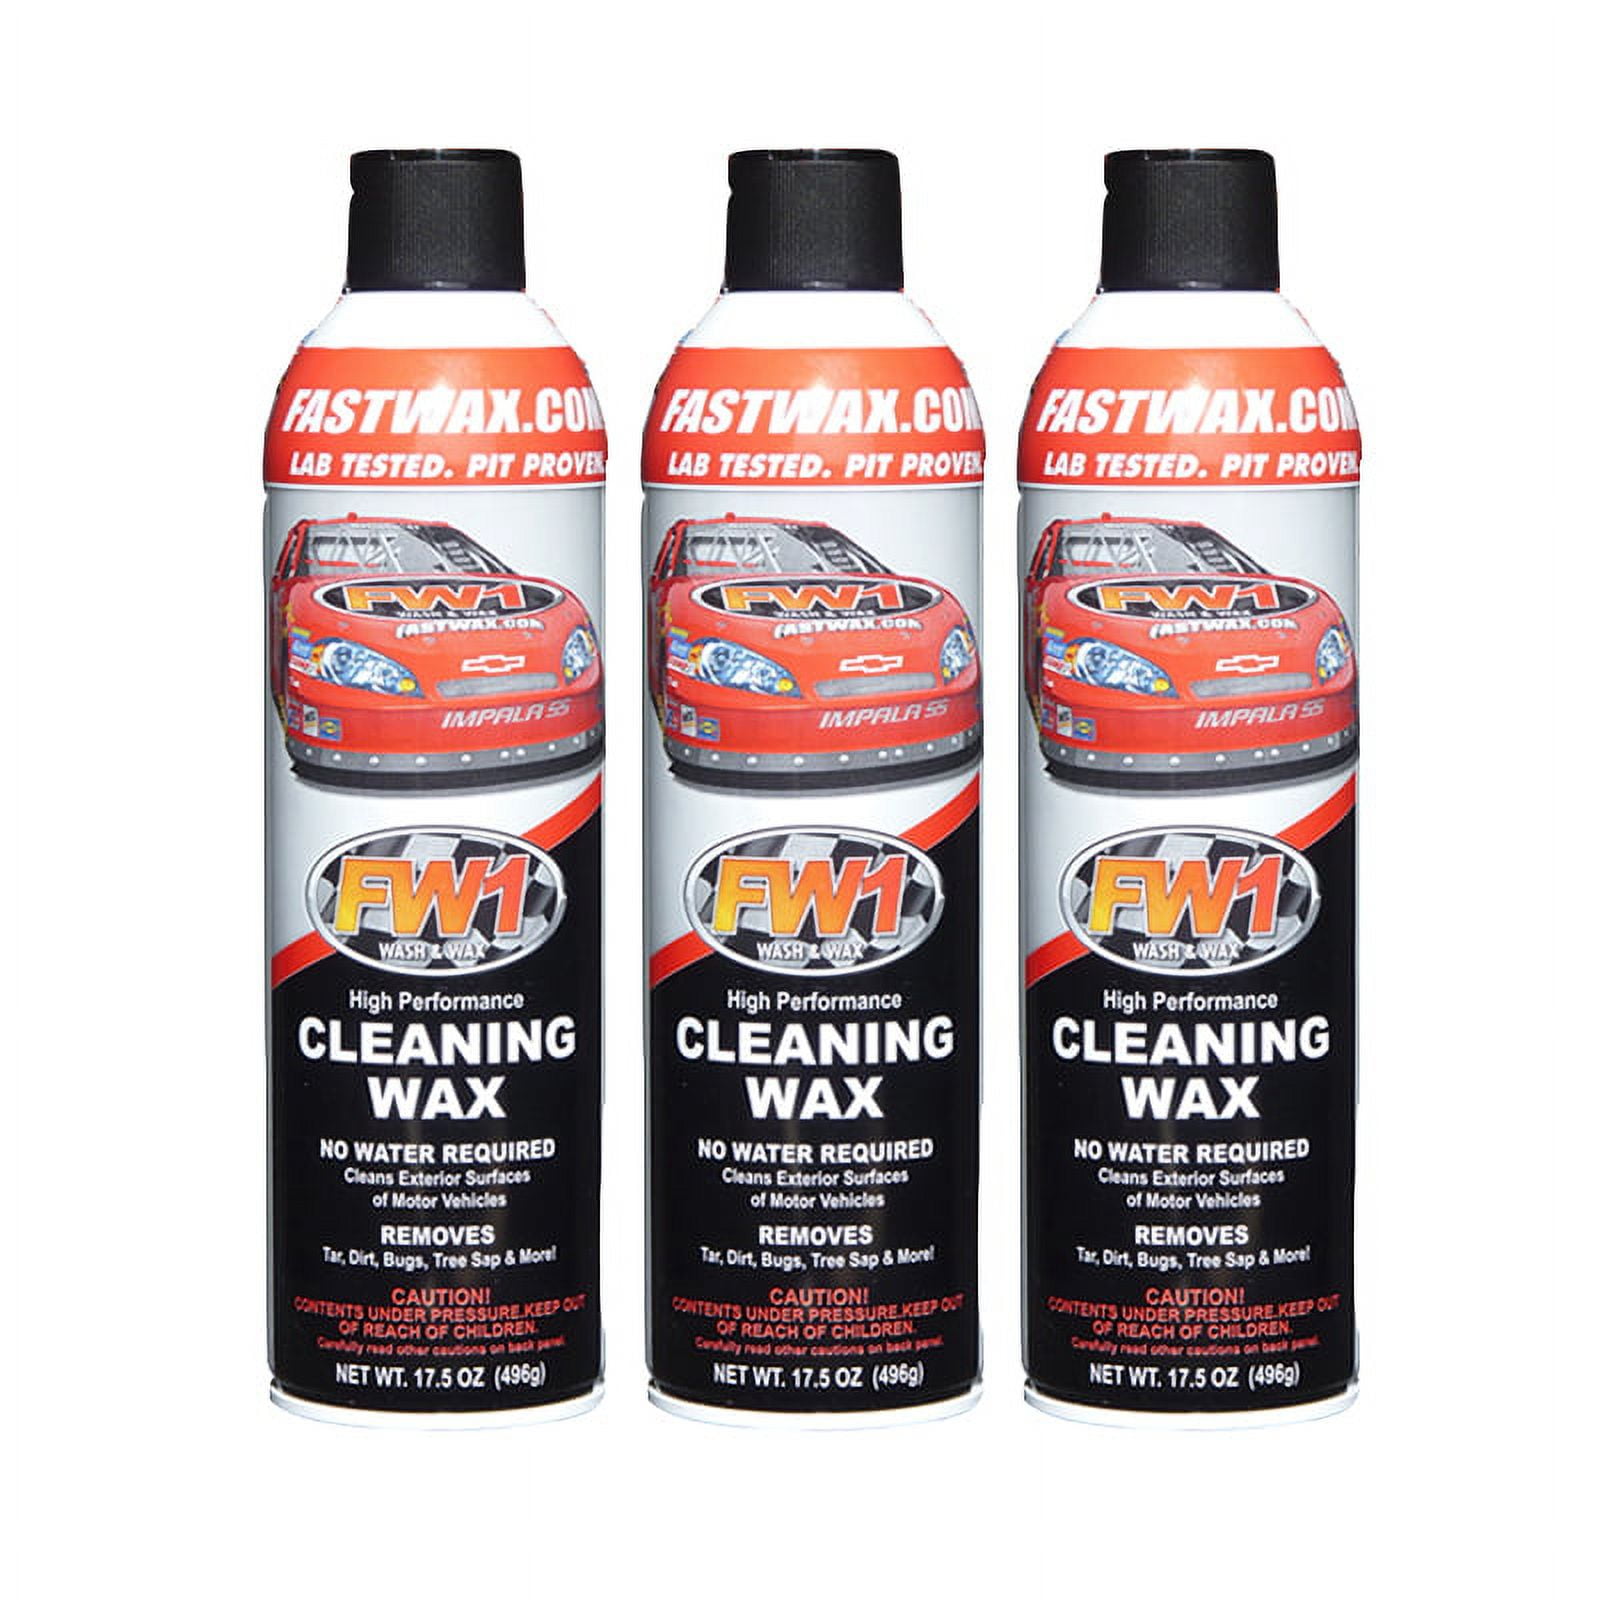 12 Pack Case FW1 Wash & Wax (Special Internet Price) [Case 12 cans FW1] -  $199.88 : FW1 Racing Formula, HIGH PERFORMANCE CLEANING WAX IN AN AEROSOL  CAN